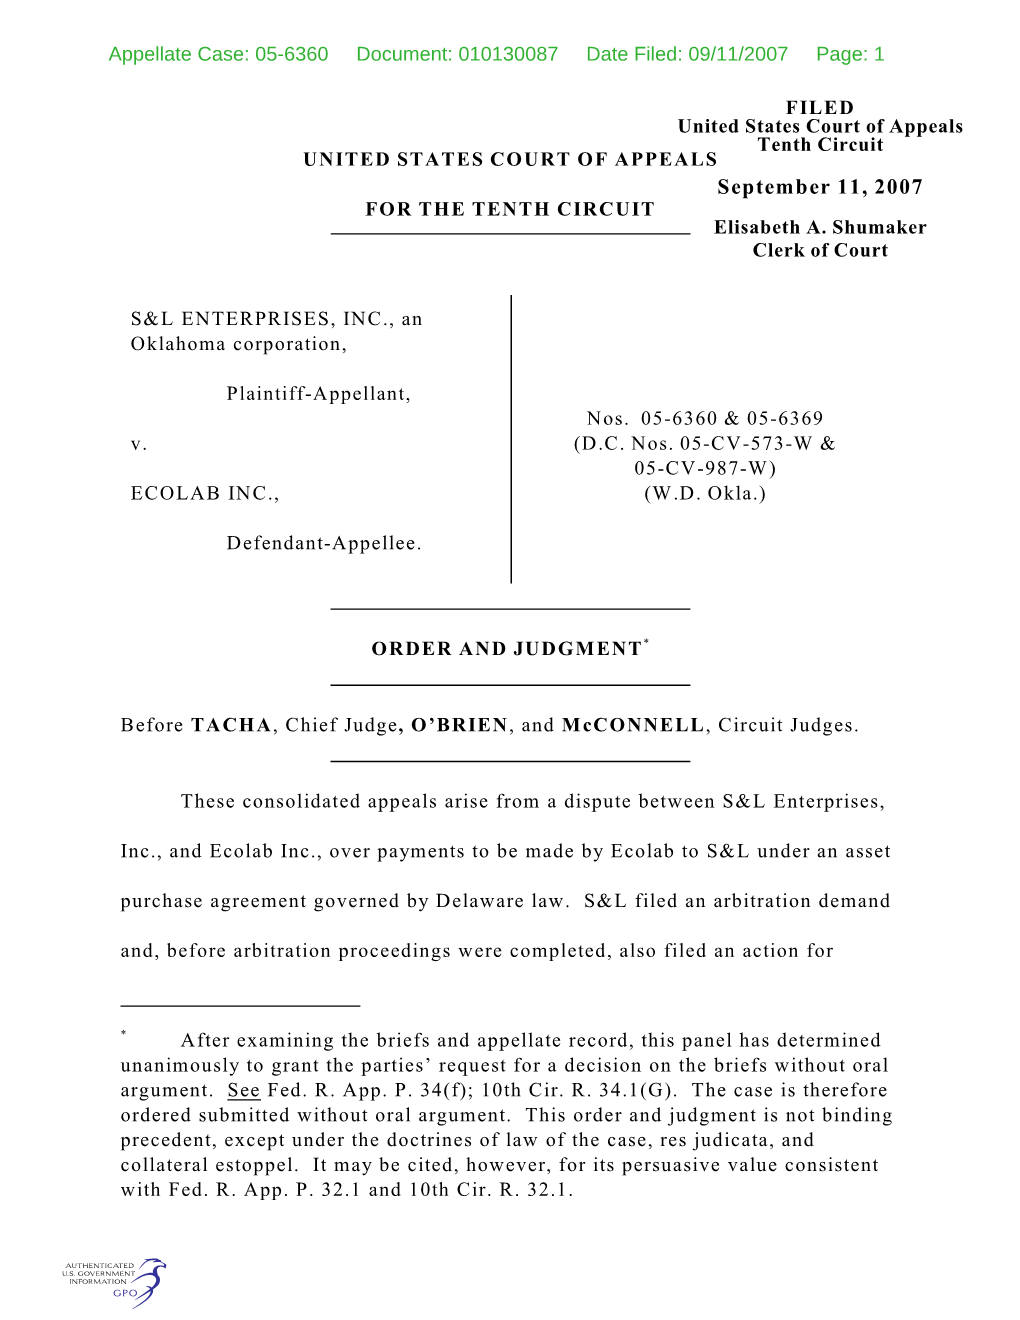 Appellate Case: 05-6360 Document: 010130087 Date Filed: 09/11/2007 Page: 1